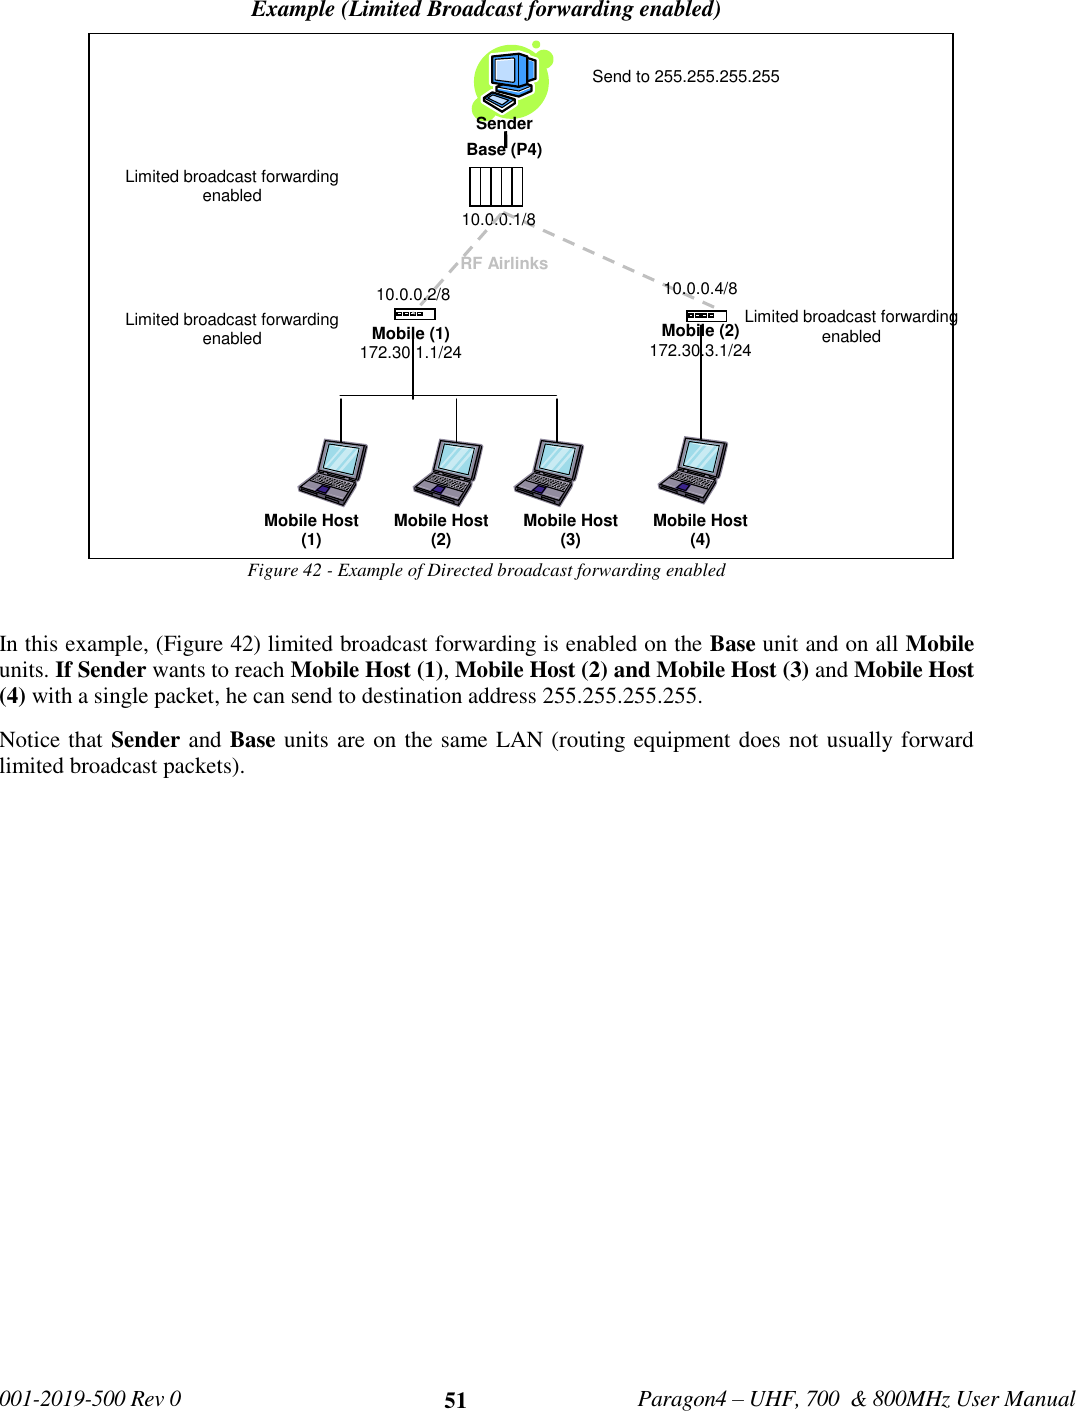   001-2019-500 Rev 0         Paragon4 – UHF, 700  &amp; 800MHz User Manual     51 Example (Limited Broadcast forwarding enabled) Figure 42 - Example of Directed broadcast forwarding enabled  In this example, (Figure 42) limited broadcast forwarding is enabled on the Base unit and on all Mobile units. If Sender wants to reach Mobile Host (1), Mobile Host (2) and Mobile Host (3) and Mobile Host (4) with a single packet, he can send to destination address 255.255.255.255. Notice that Sender and Base units are on the same LAN (routing equipment does not usually forward limited broadcast packets).      Base (P4) RF Airlinks Mobile Host (2) 172.30.1.3/24 Mobile Host (3) 172.30.1.4/24 Mobile (1) 172.30.1.1/24 Mobile (2) 172.30.3.1/24 Mobile Host (1) 172.30.1.2/24 Mobile Host (4) 172.30.3.2/24 10.0.0.1/8 10.0.0.4/8 Limited broadcast forwarding enabled Limited broadcast forwarding enabled Send to 255.255.255.255 Limited broadcast forwarding enabled Sender  10.0.0.2/8 